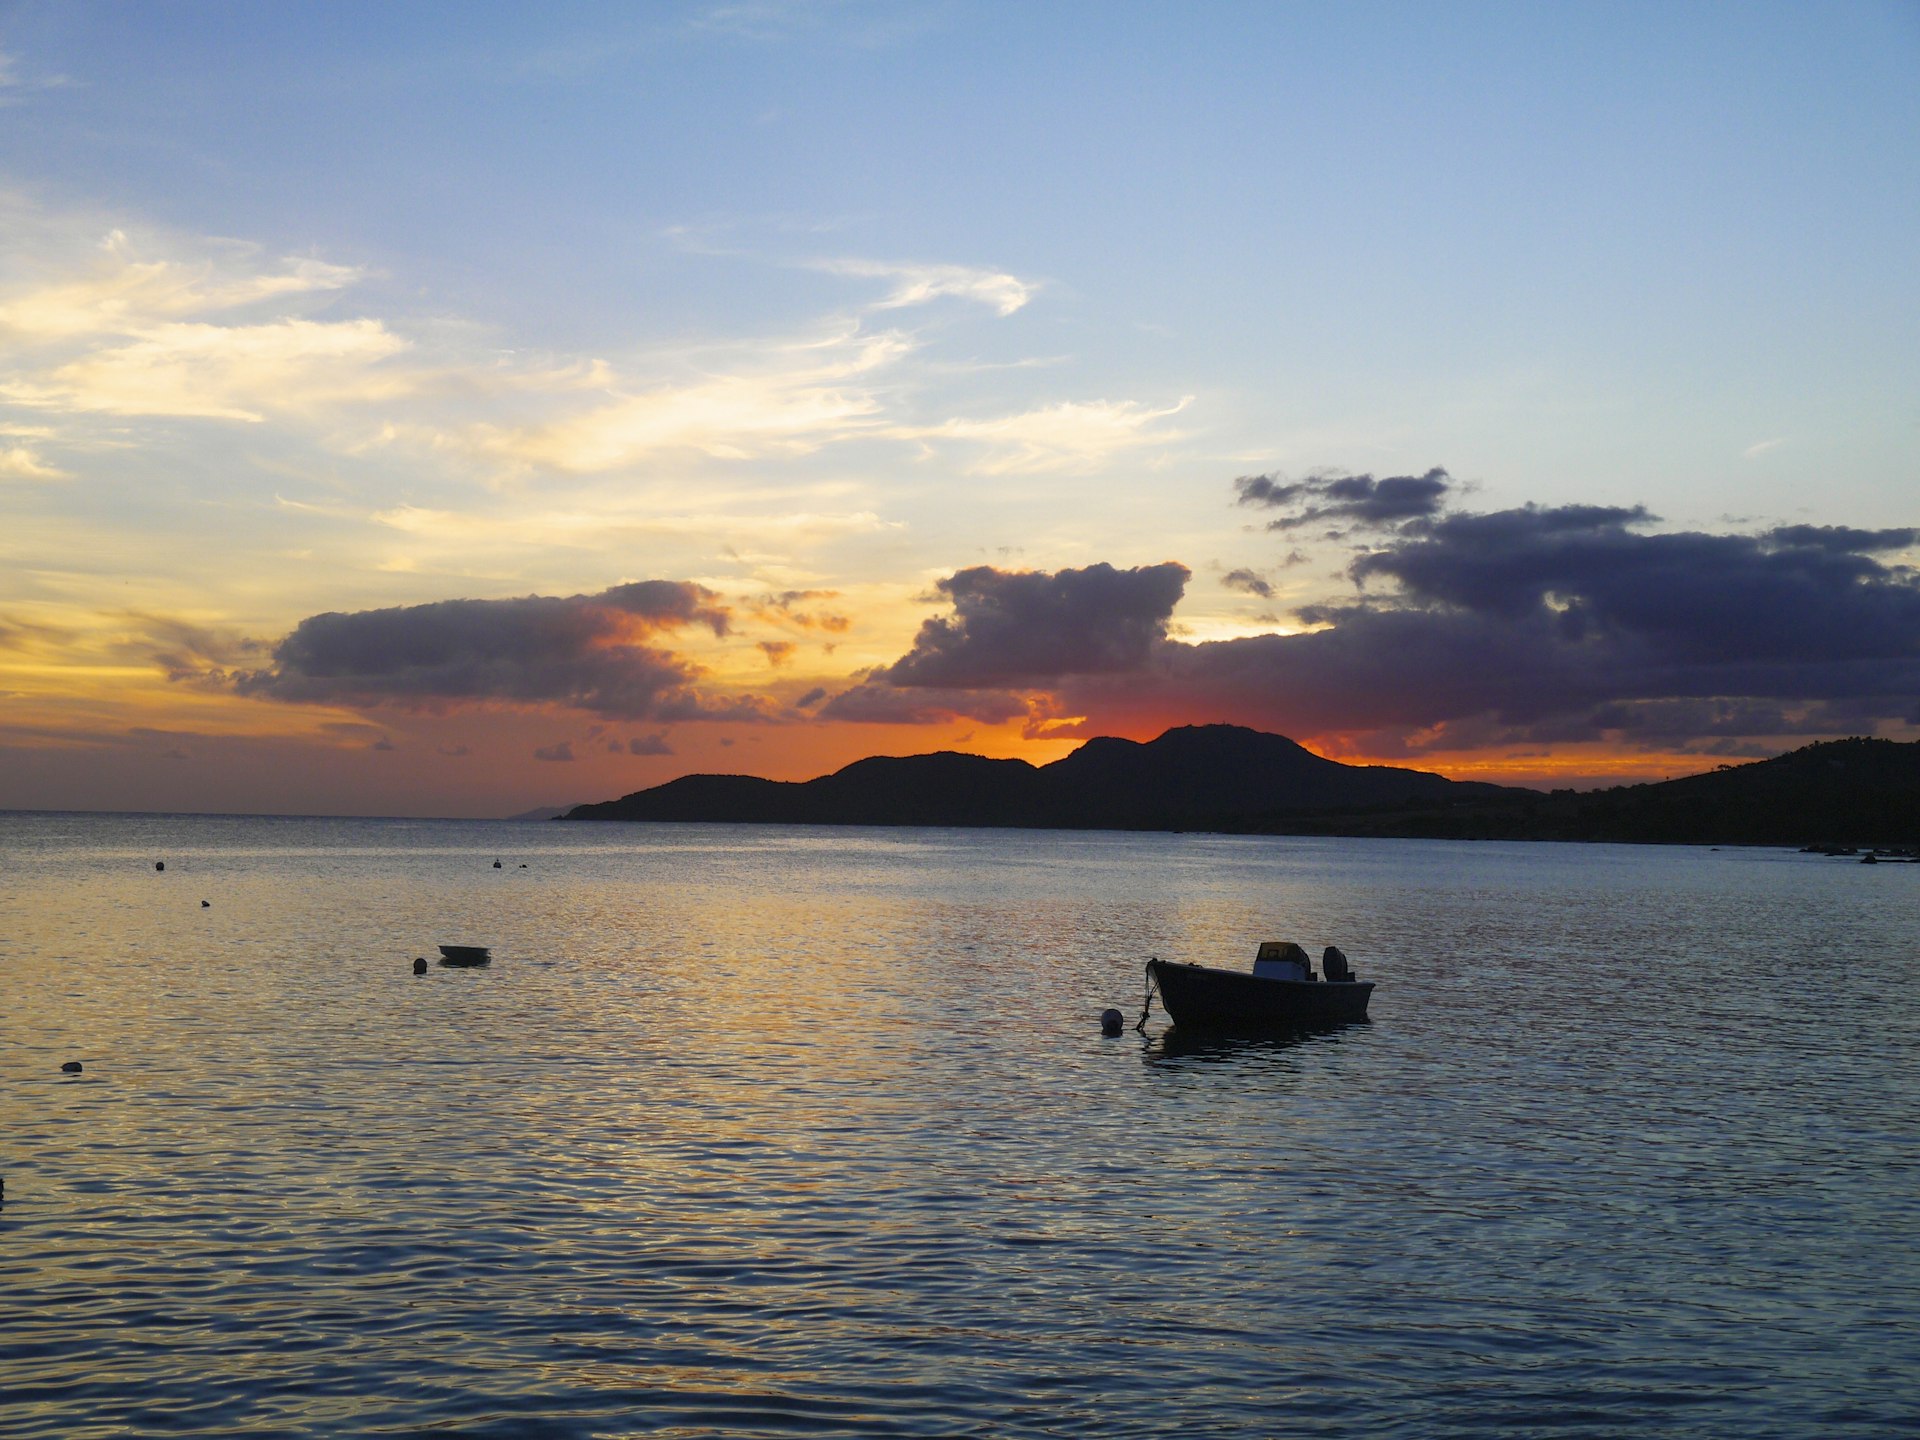 Boats in a bay and sunset over the water in Vieques, Puerto Rico